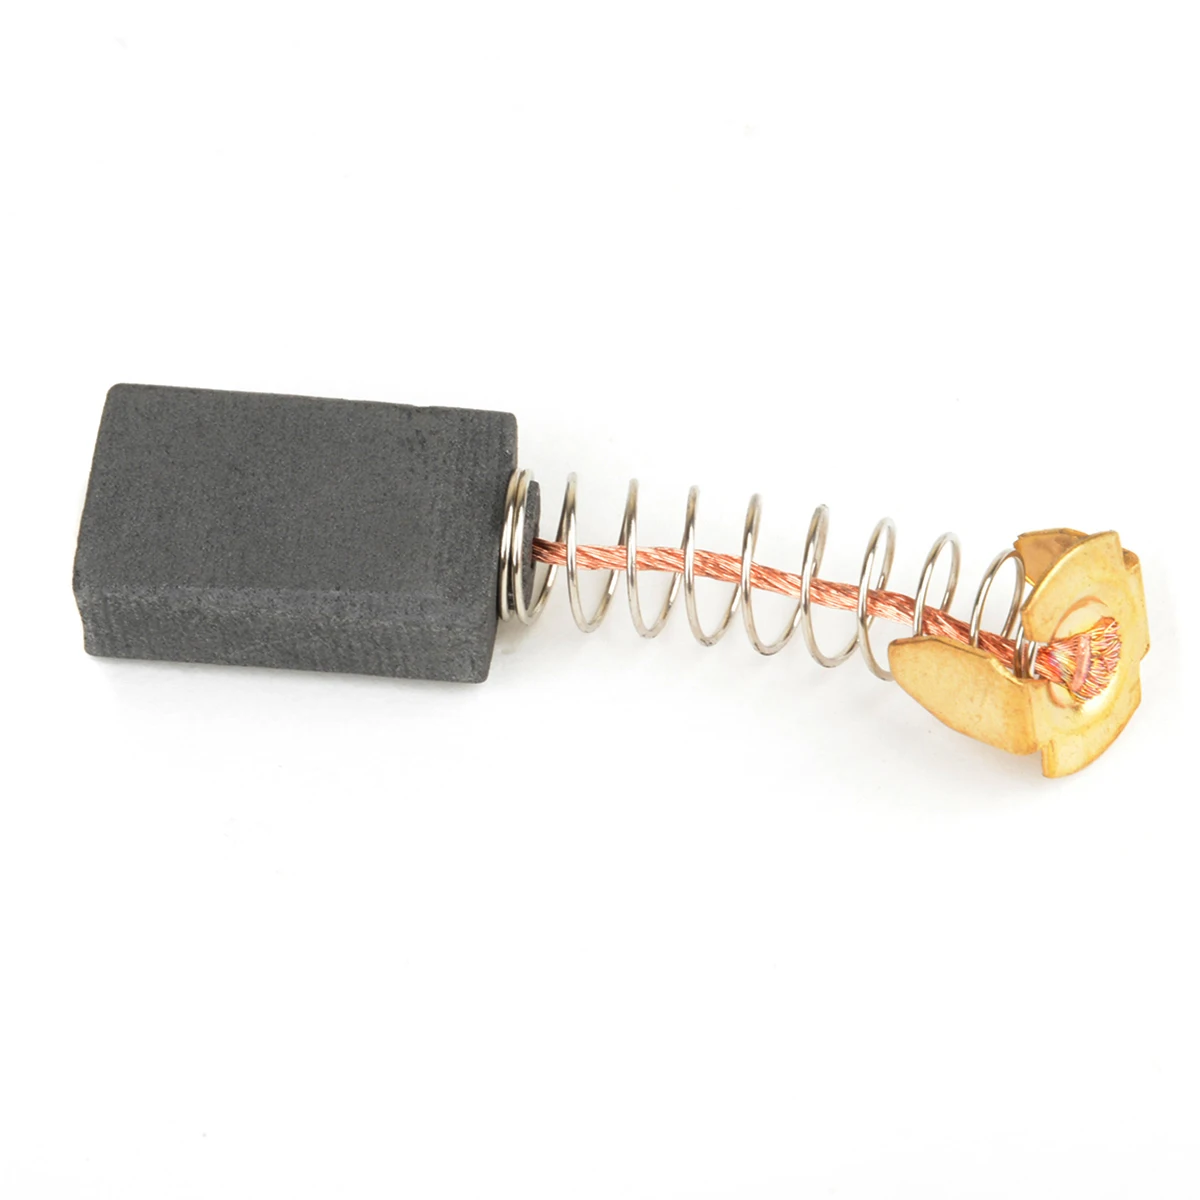 20pcs 5 x 12 x 20mm Universal Motor Carbon Brushes For Electric Tools